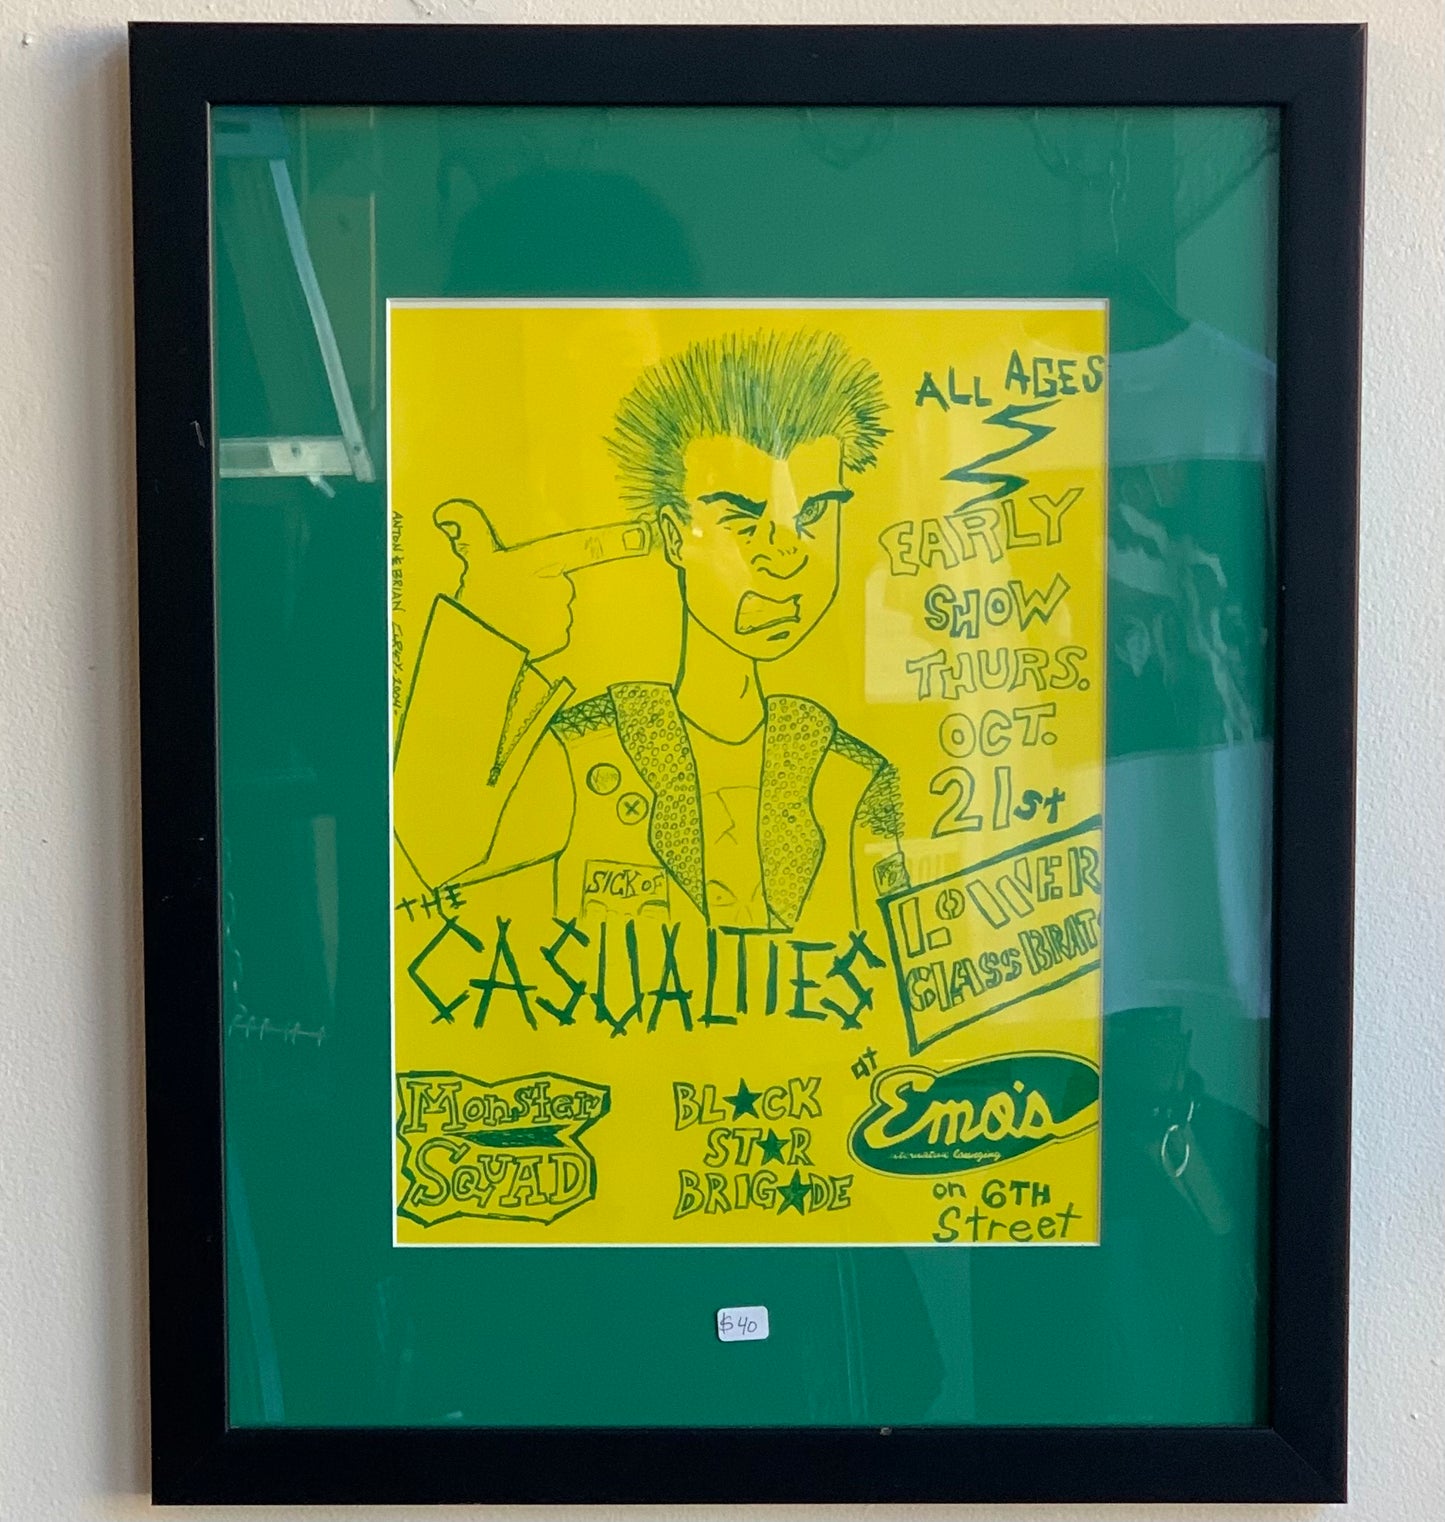 2004 The Casualties Lower Class Brats Monster Squad and Black Star Brigade Emo’s Framed Show Flyer